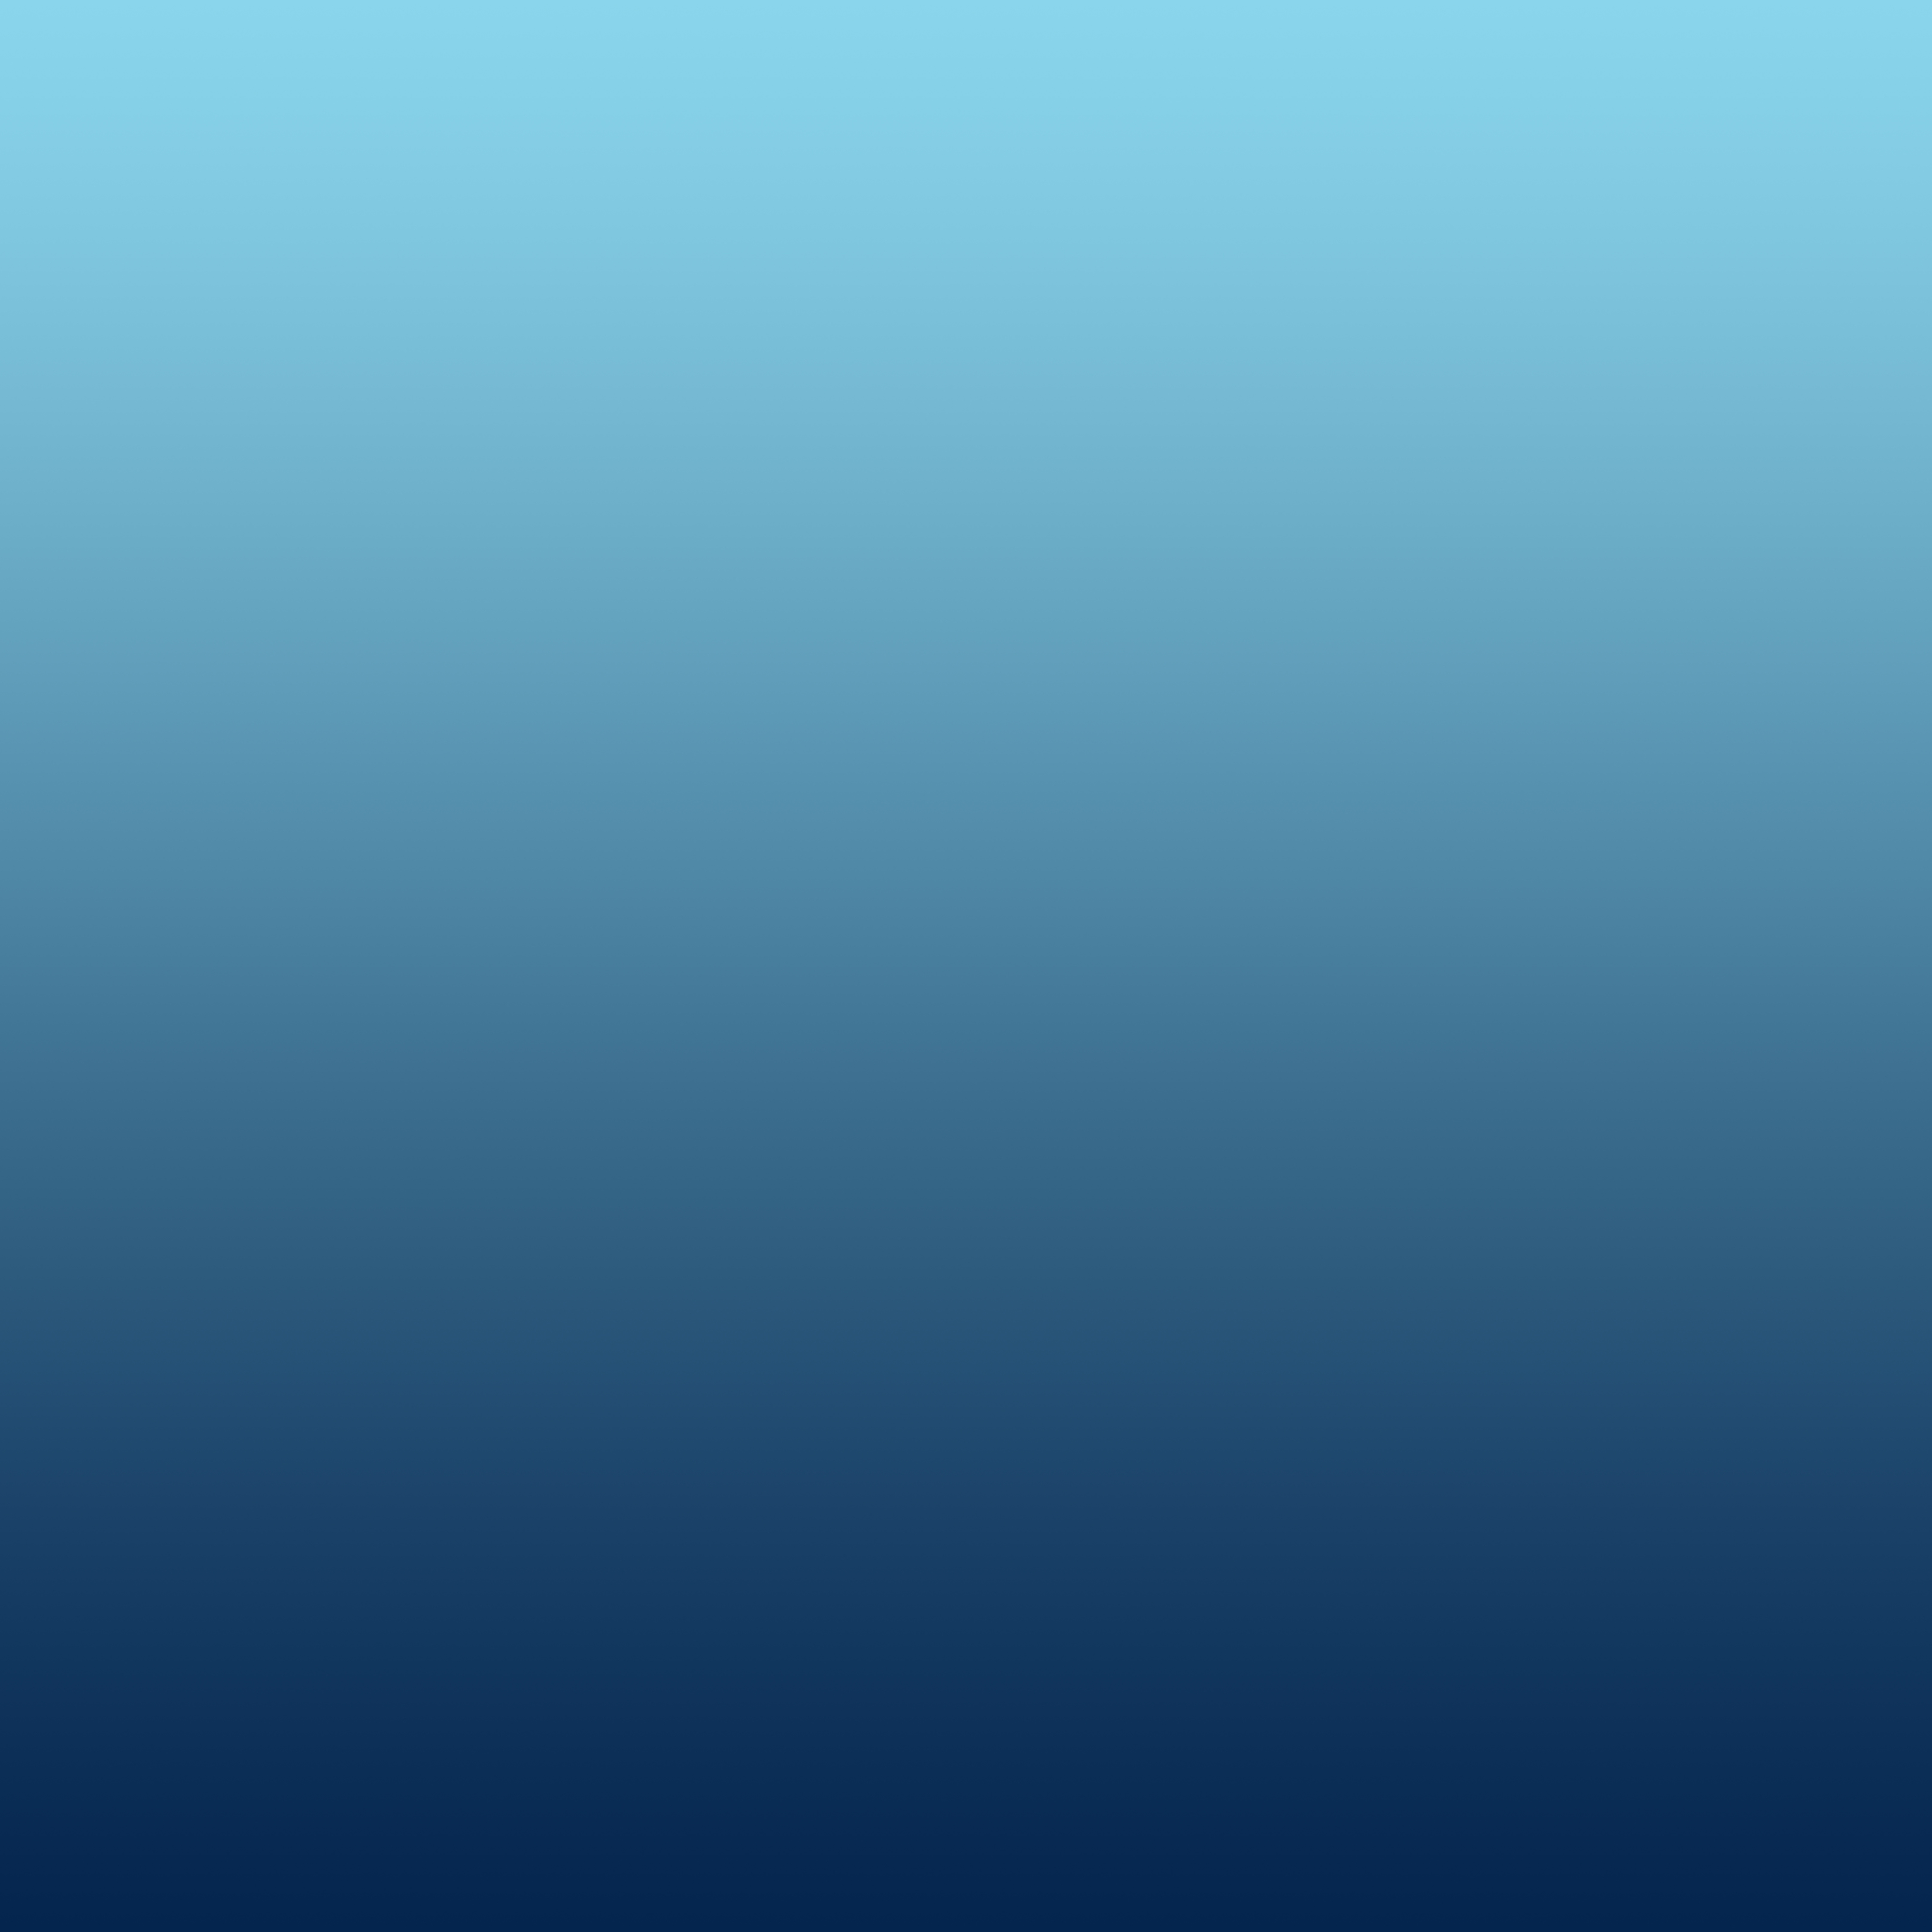 Classic Blue Gradient Background Ombre 